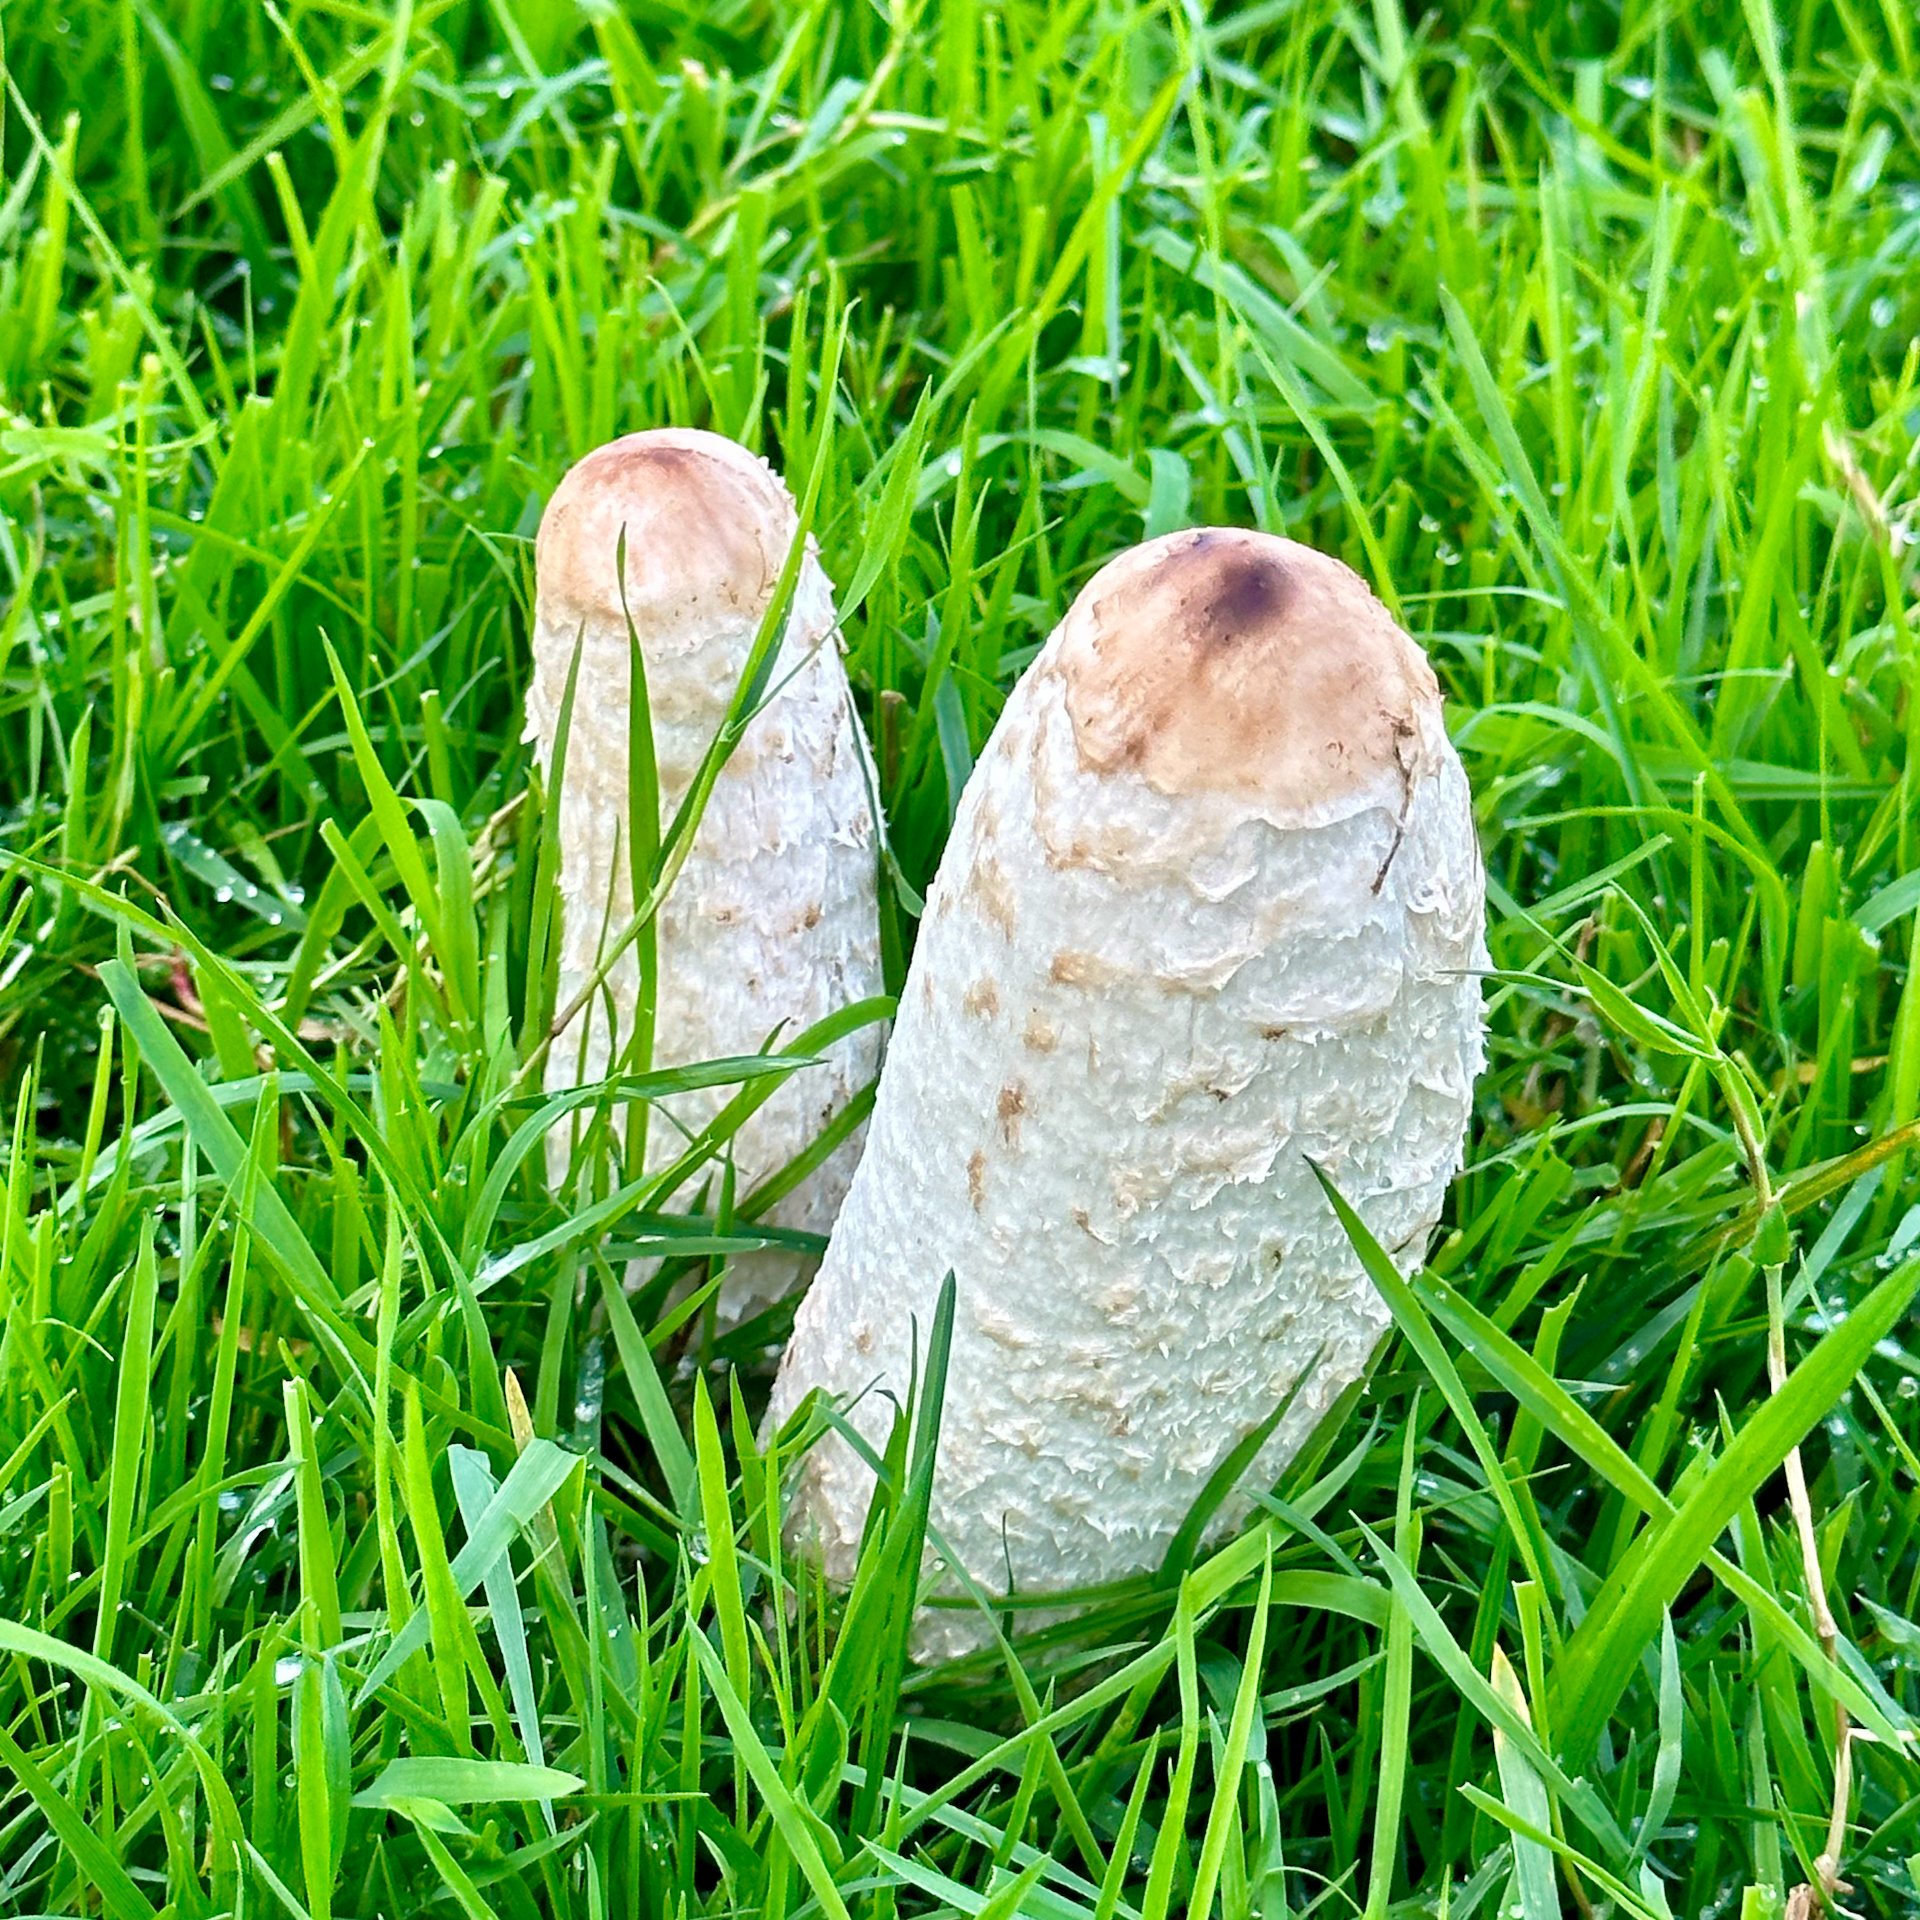  Just off one of the fairways, some cool mushrooms! 